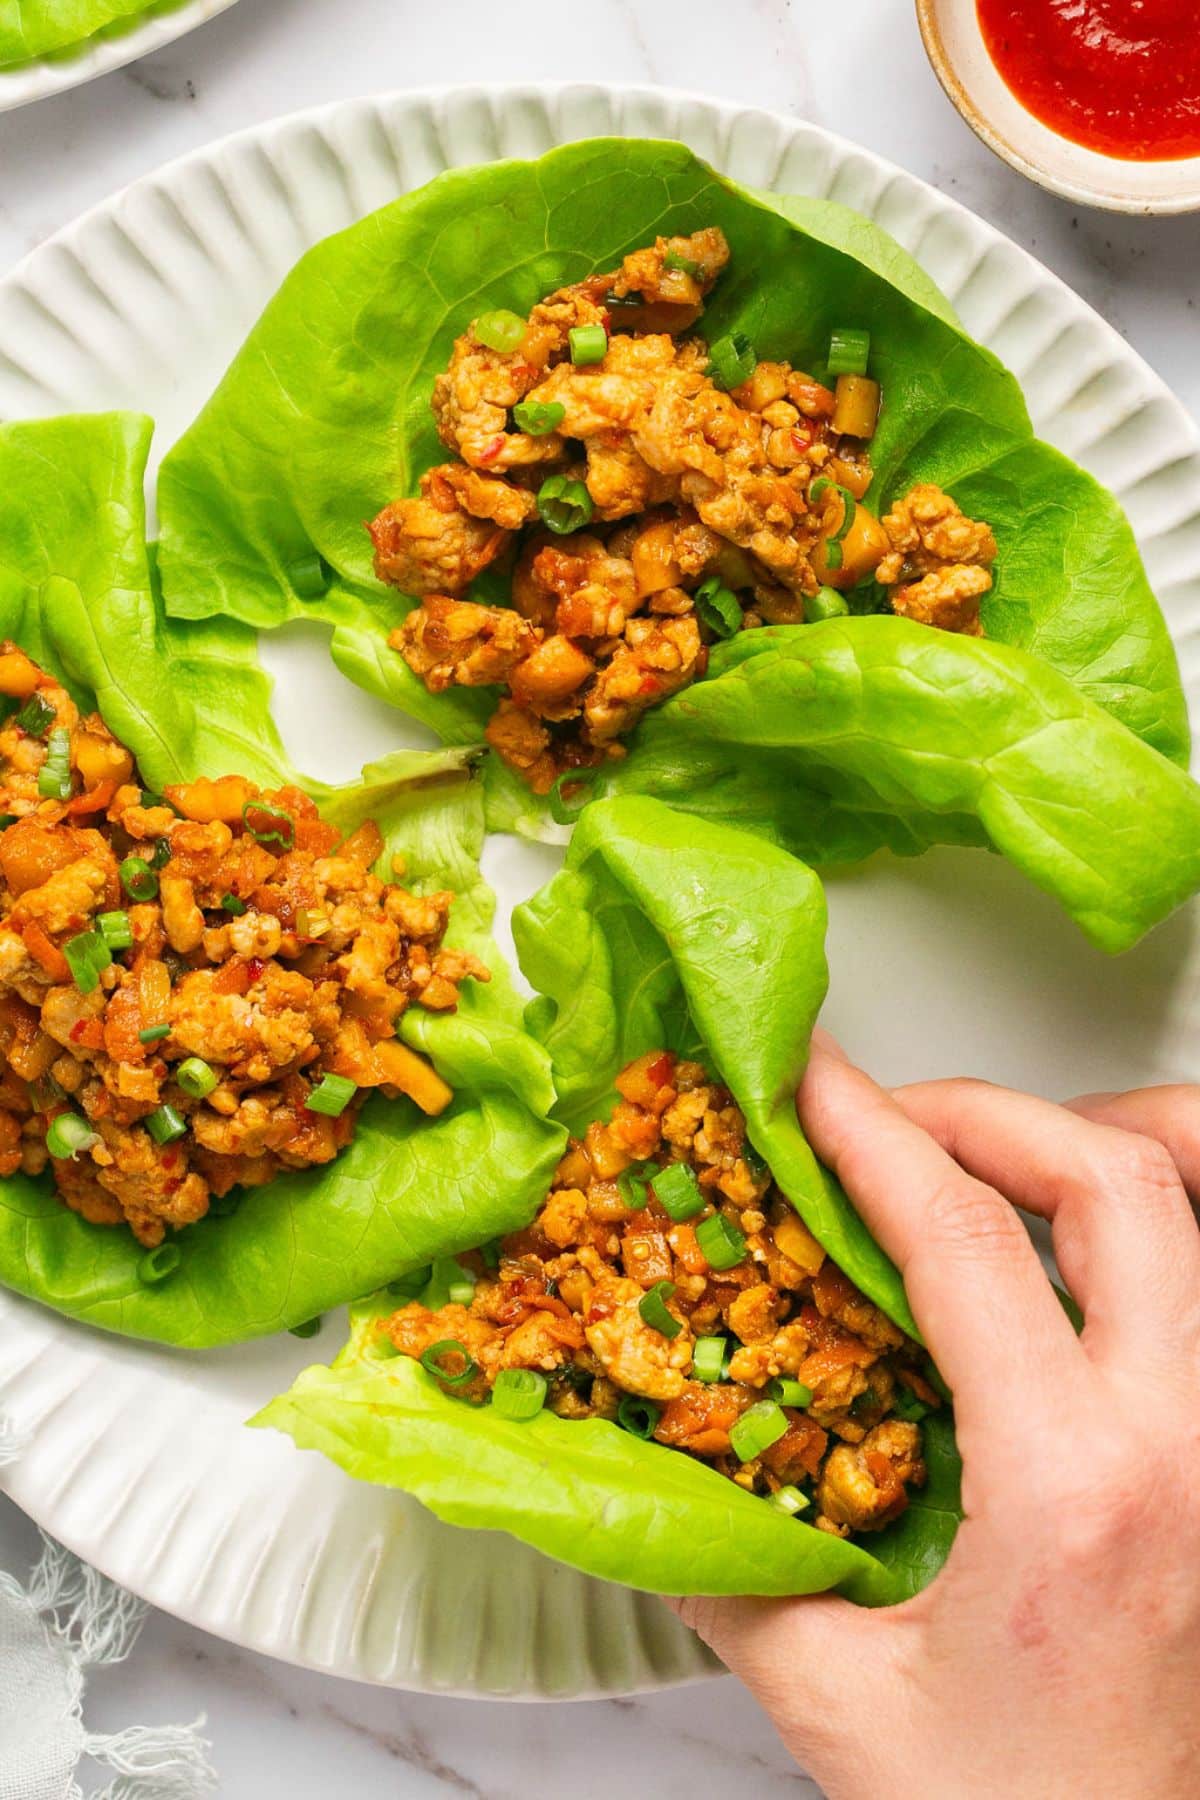 Meal Prep Healthy Chicken Lettuce Wraps! A Gluten Free appetizer or meal filled with spicy flavor! Minimal ingredients and quick to make. Perfect for an easy meal prep! Paleo + Gluten Free + Low Calorie